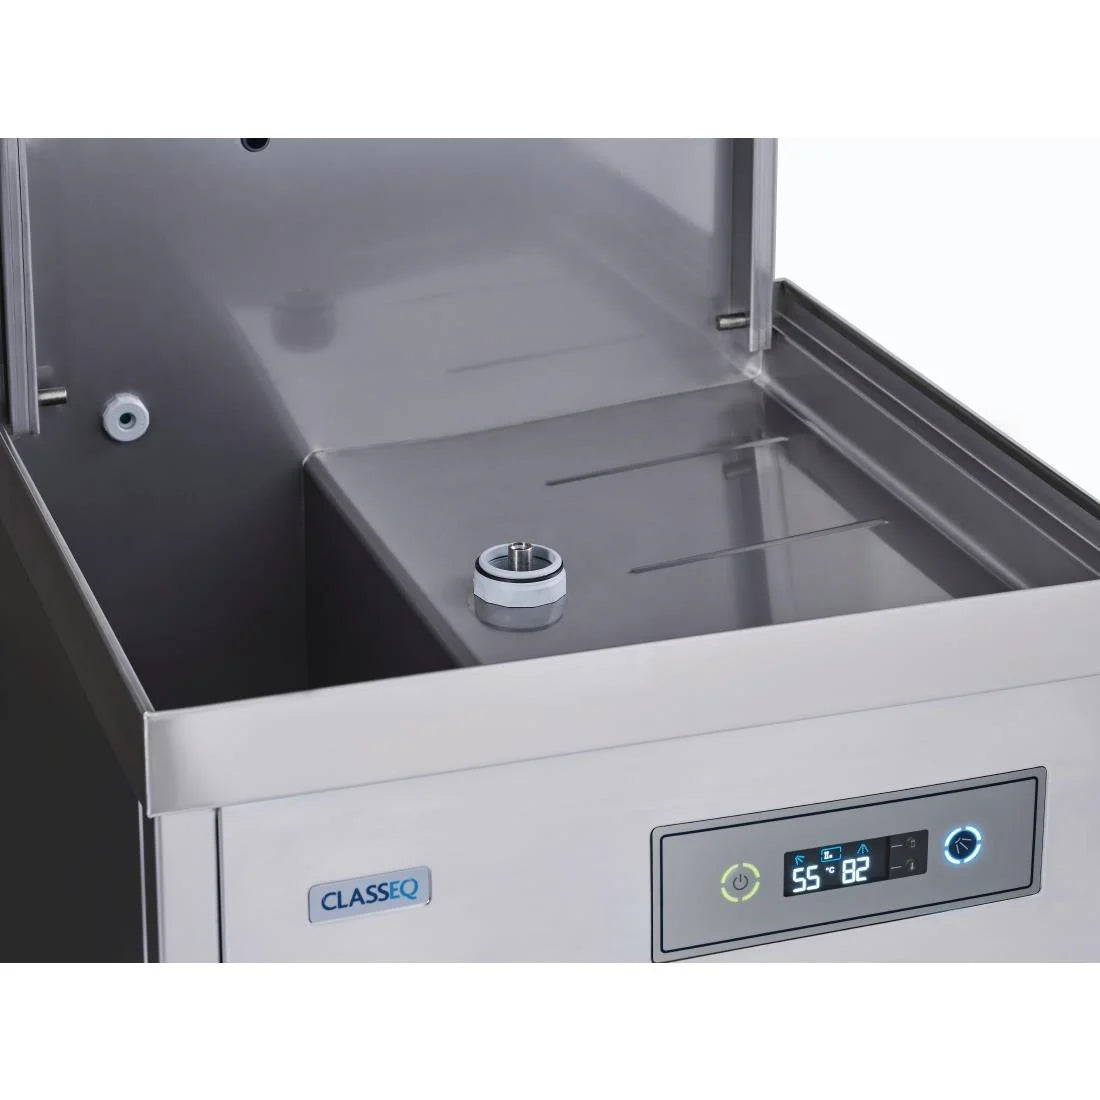 Classeq Passthough Dishwasher - P500A30 30-amp single phase DS504 JD Catering Equipment Solutions Ltd